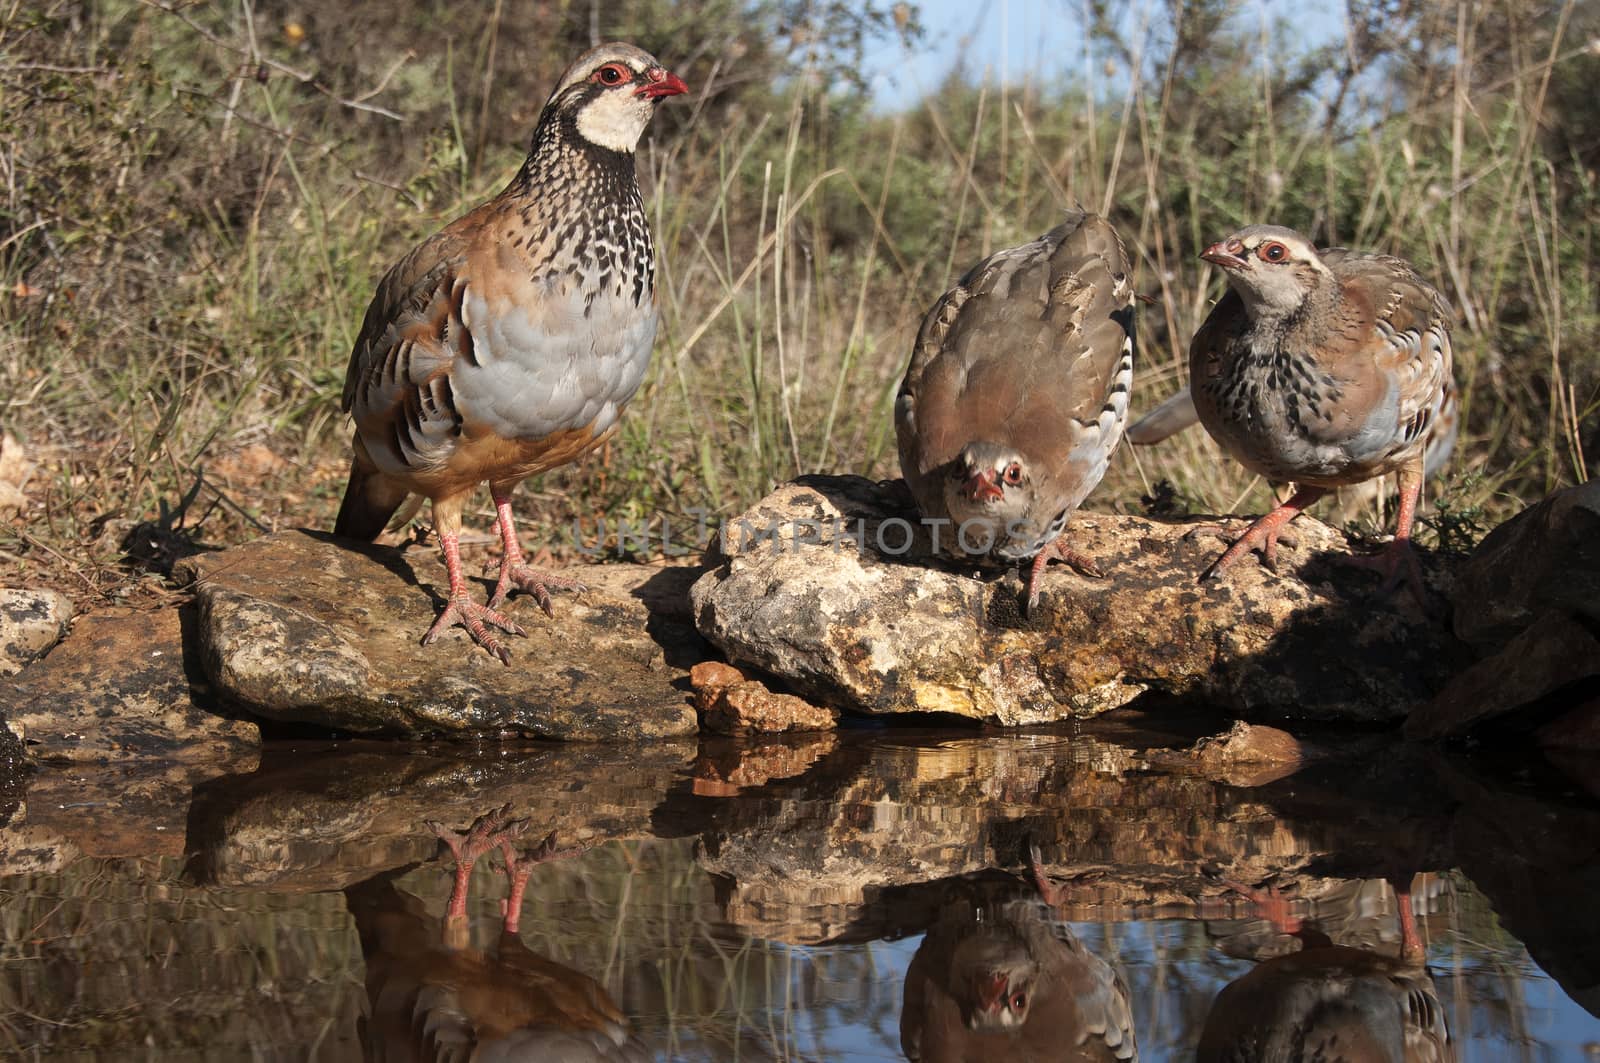 The red-legged, Alectoris rufa, family drinking water  by jalonsohu@gmail.com